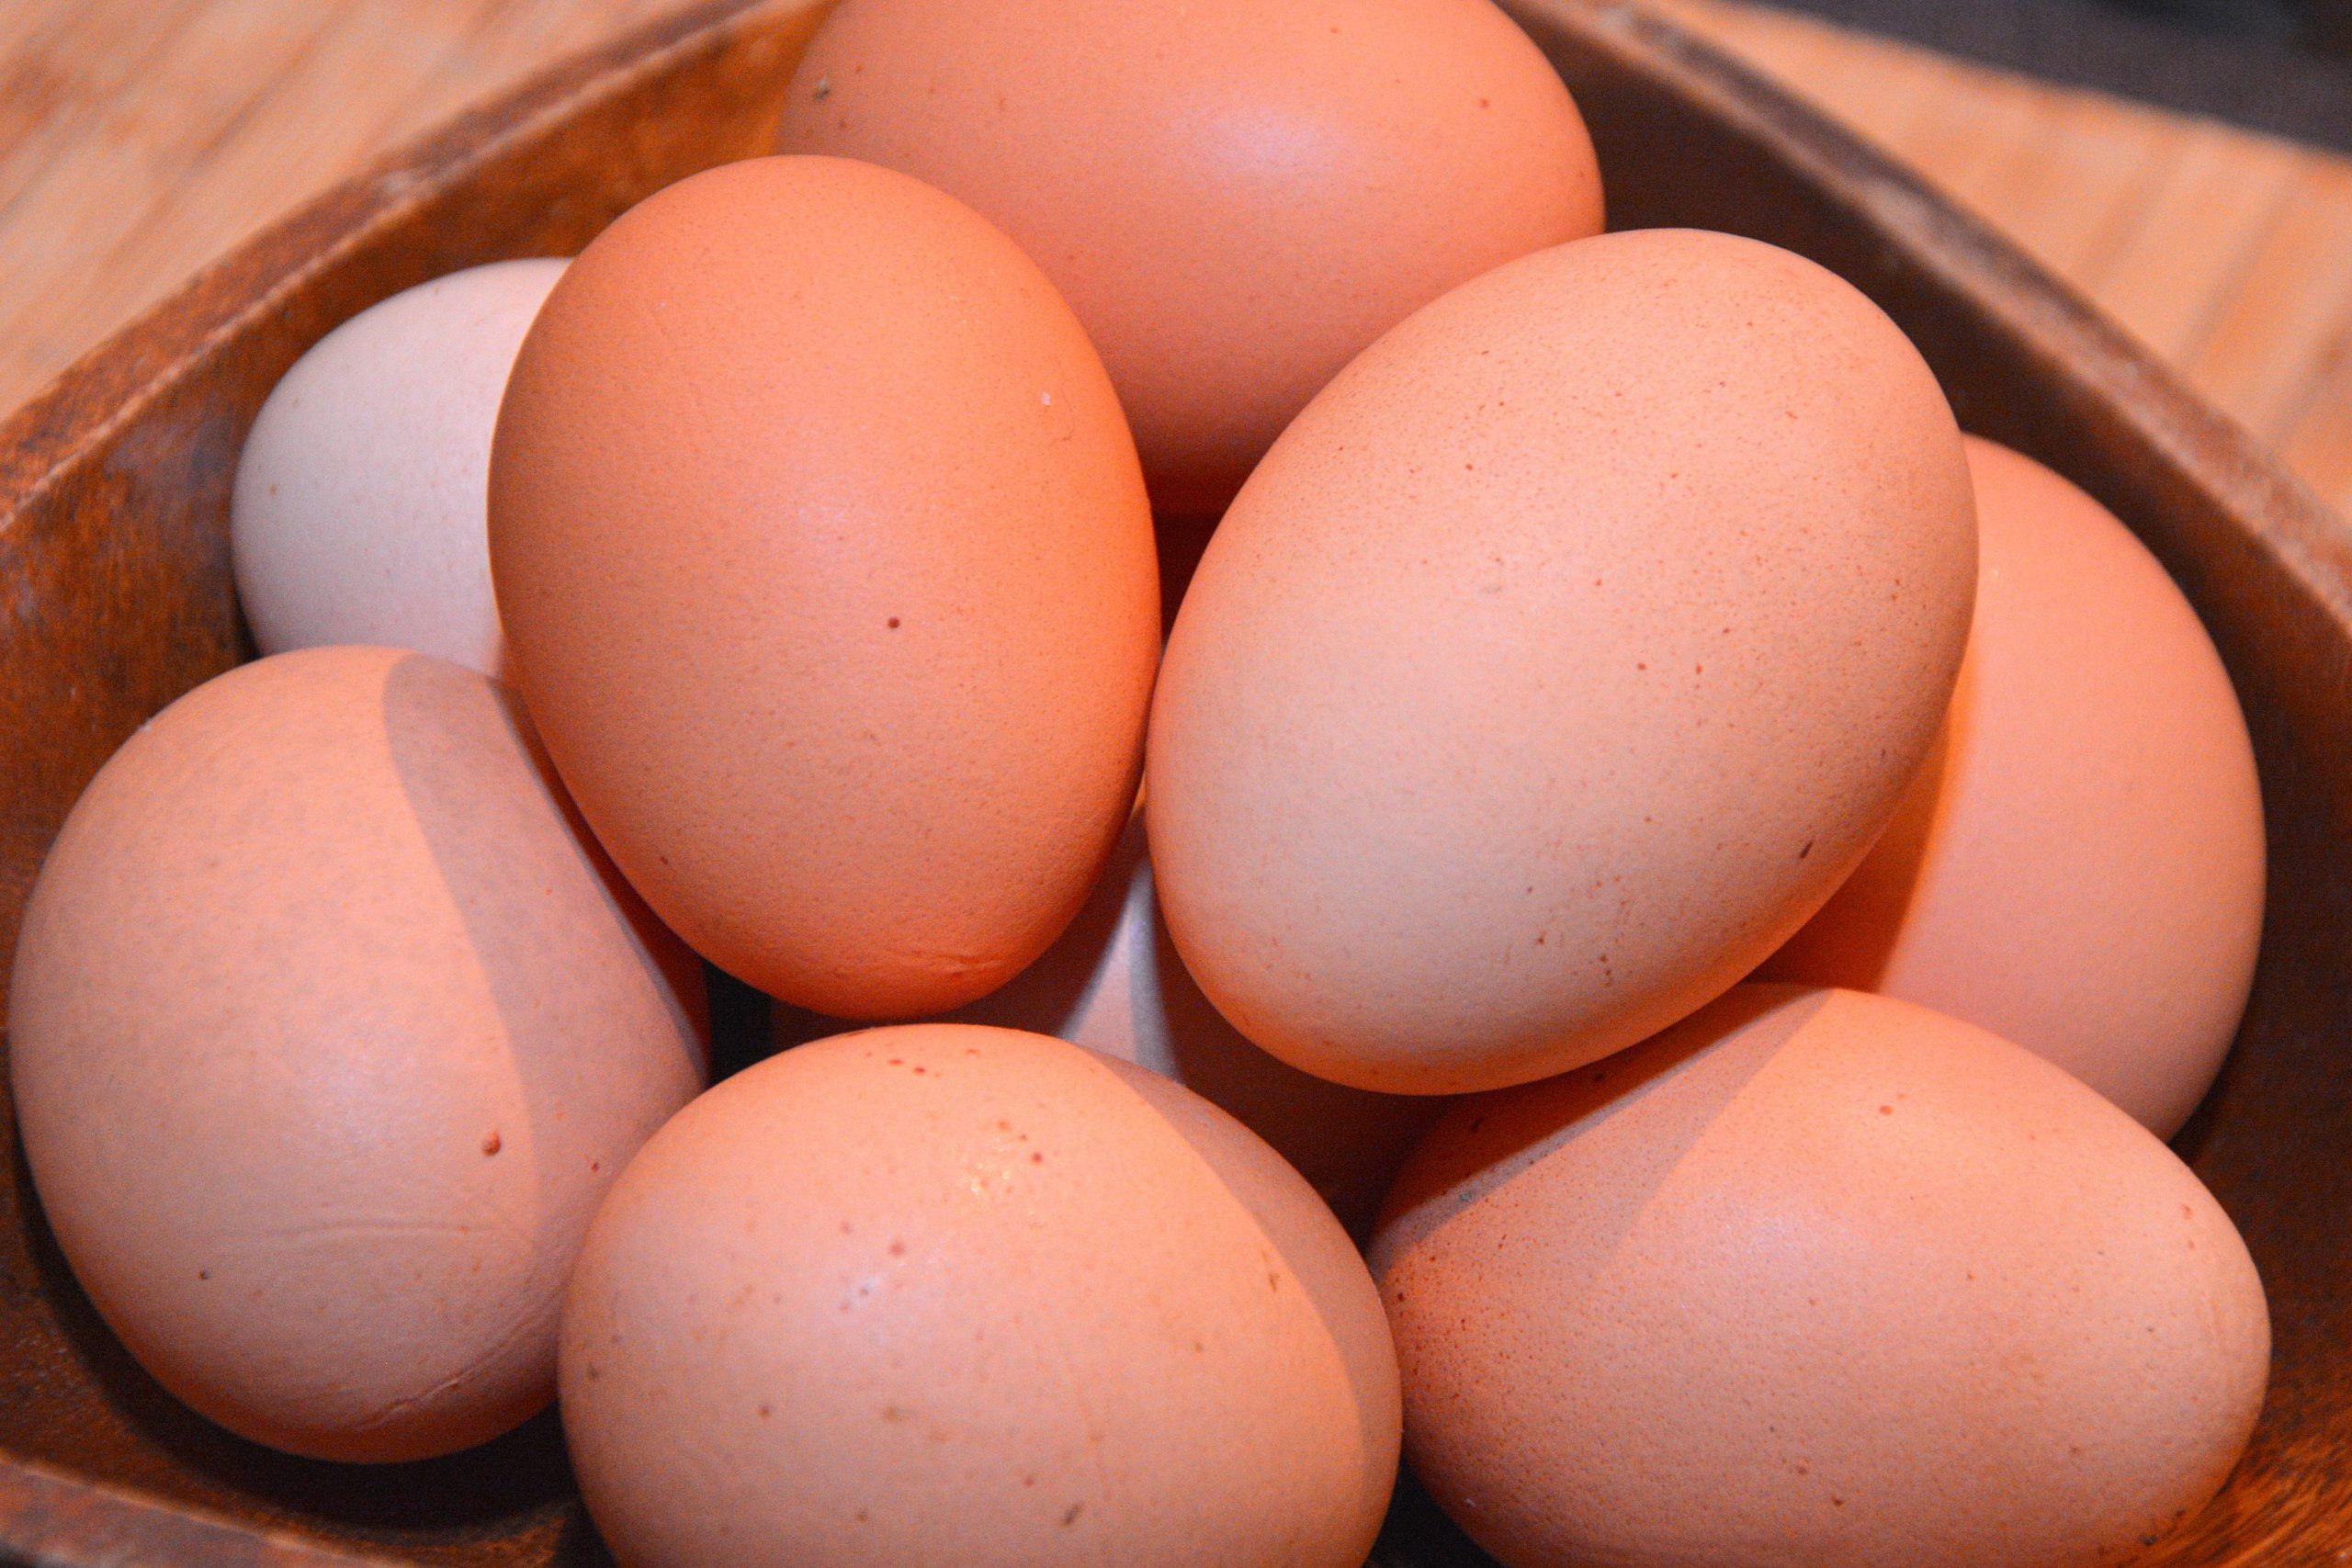 US Major egg recall following salmonella outbreak Poultry World